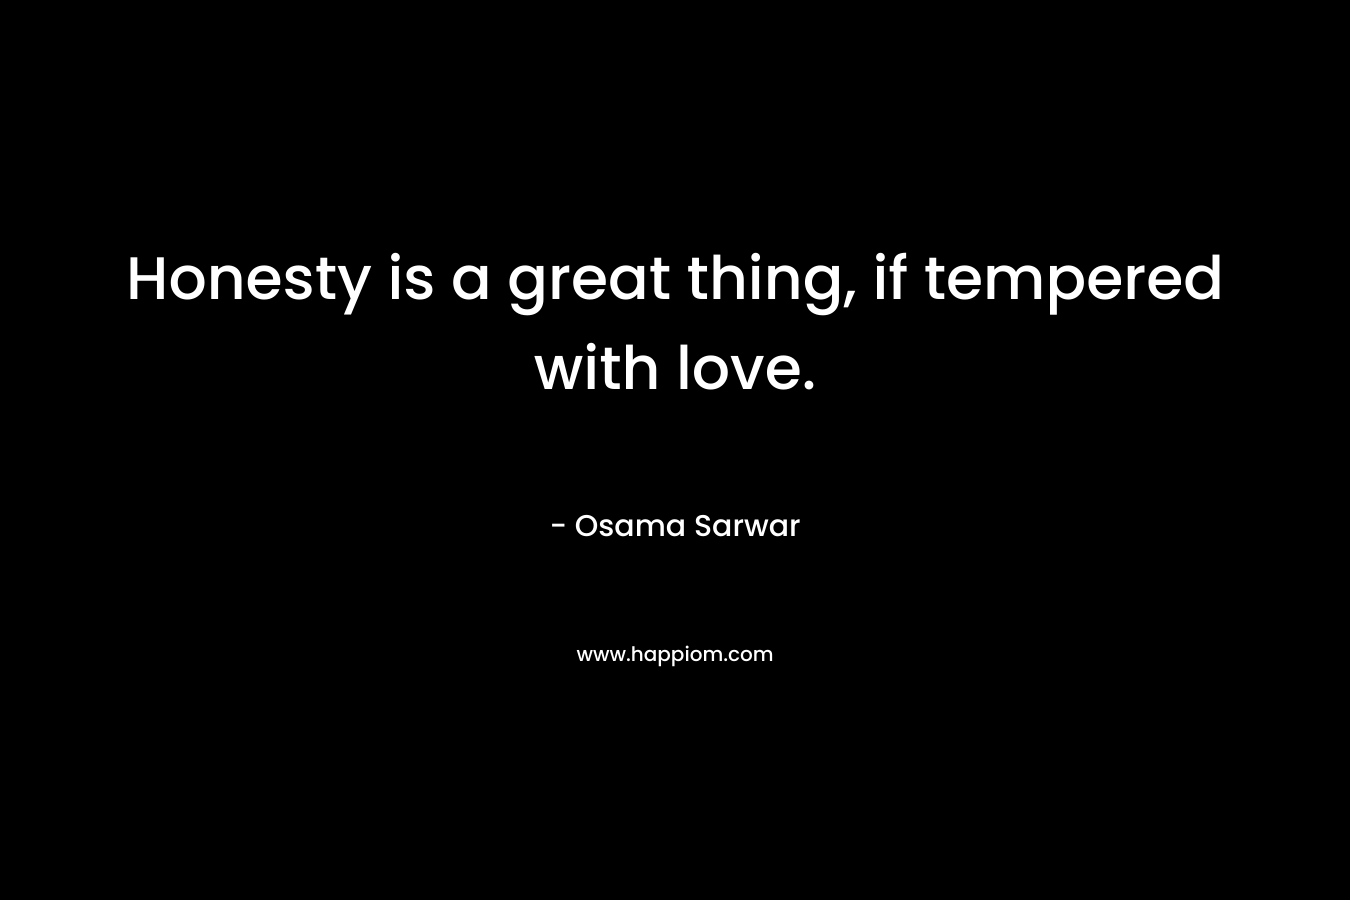 Honesty is a great thing, if tempered with love. – Osama Sarwar